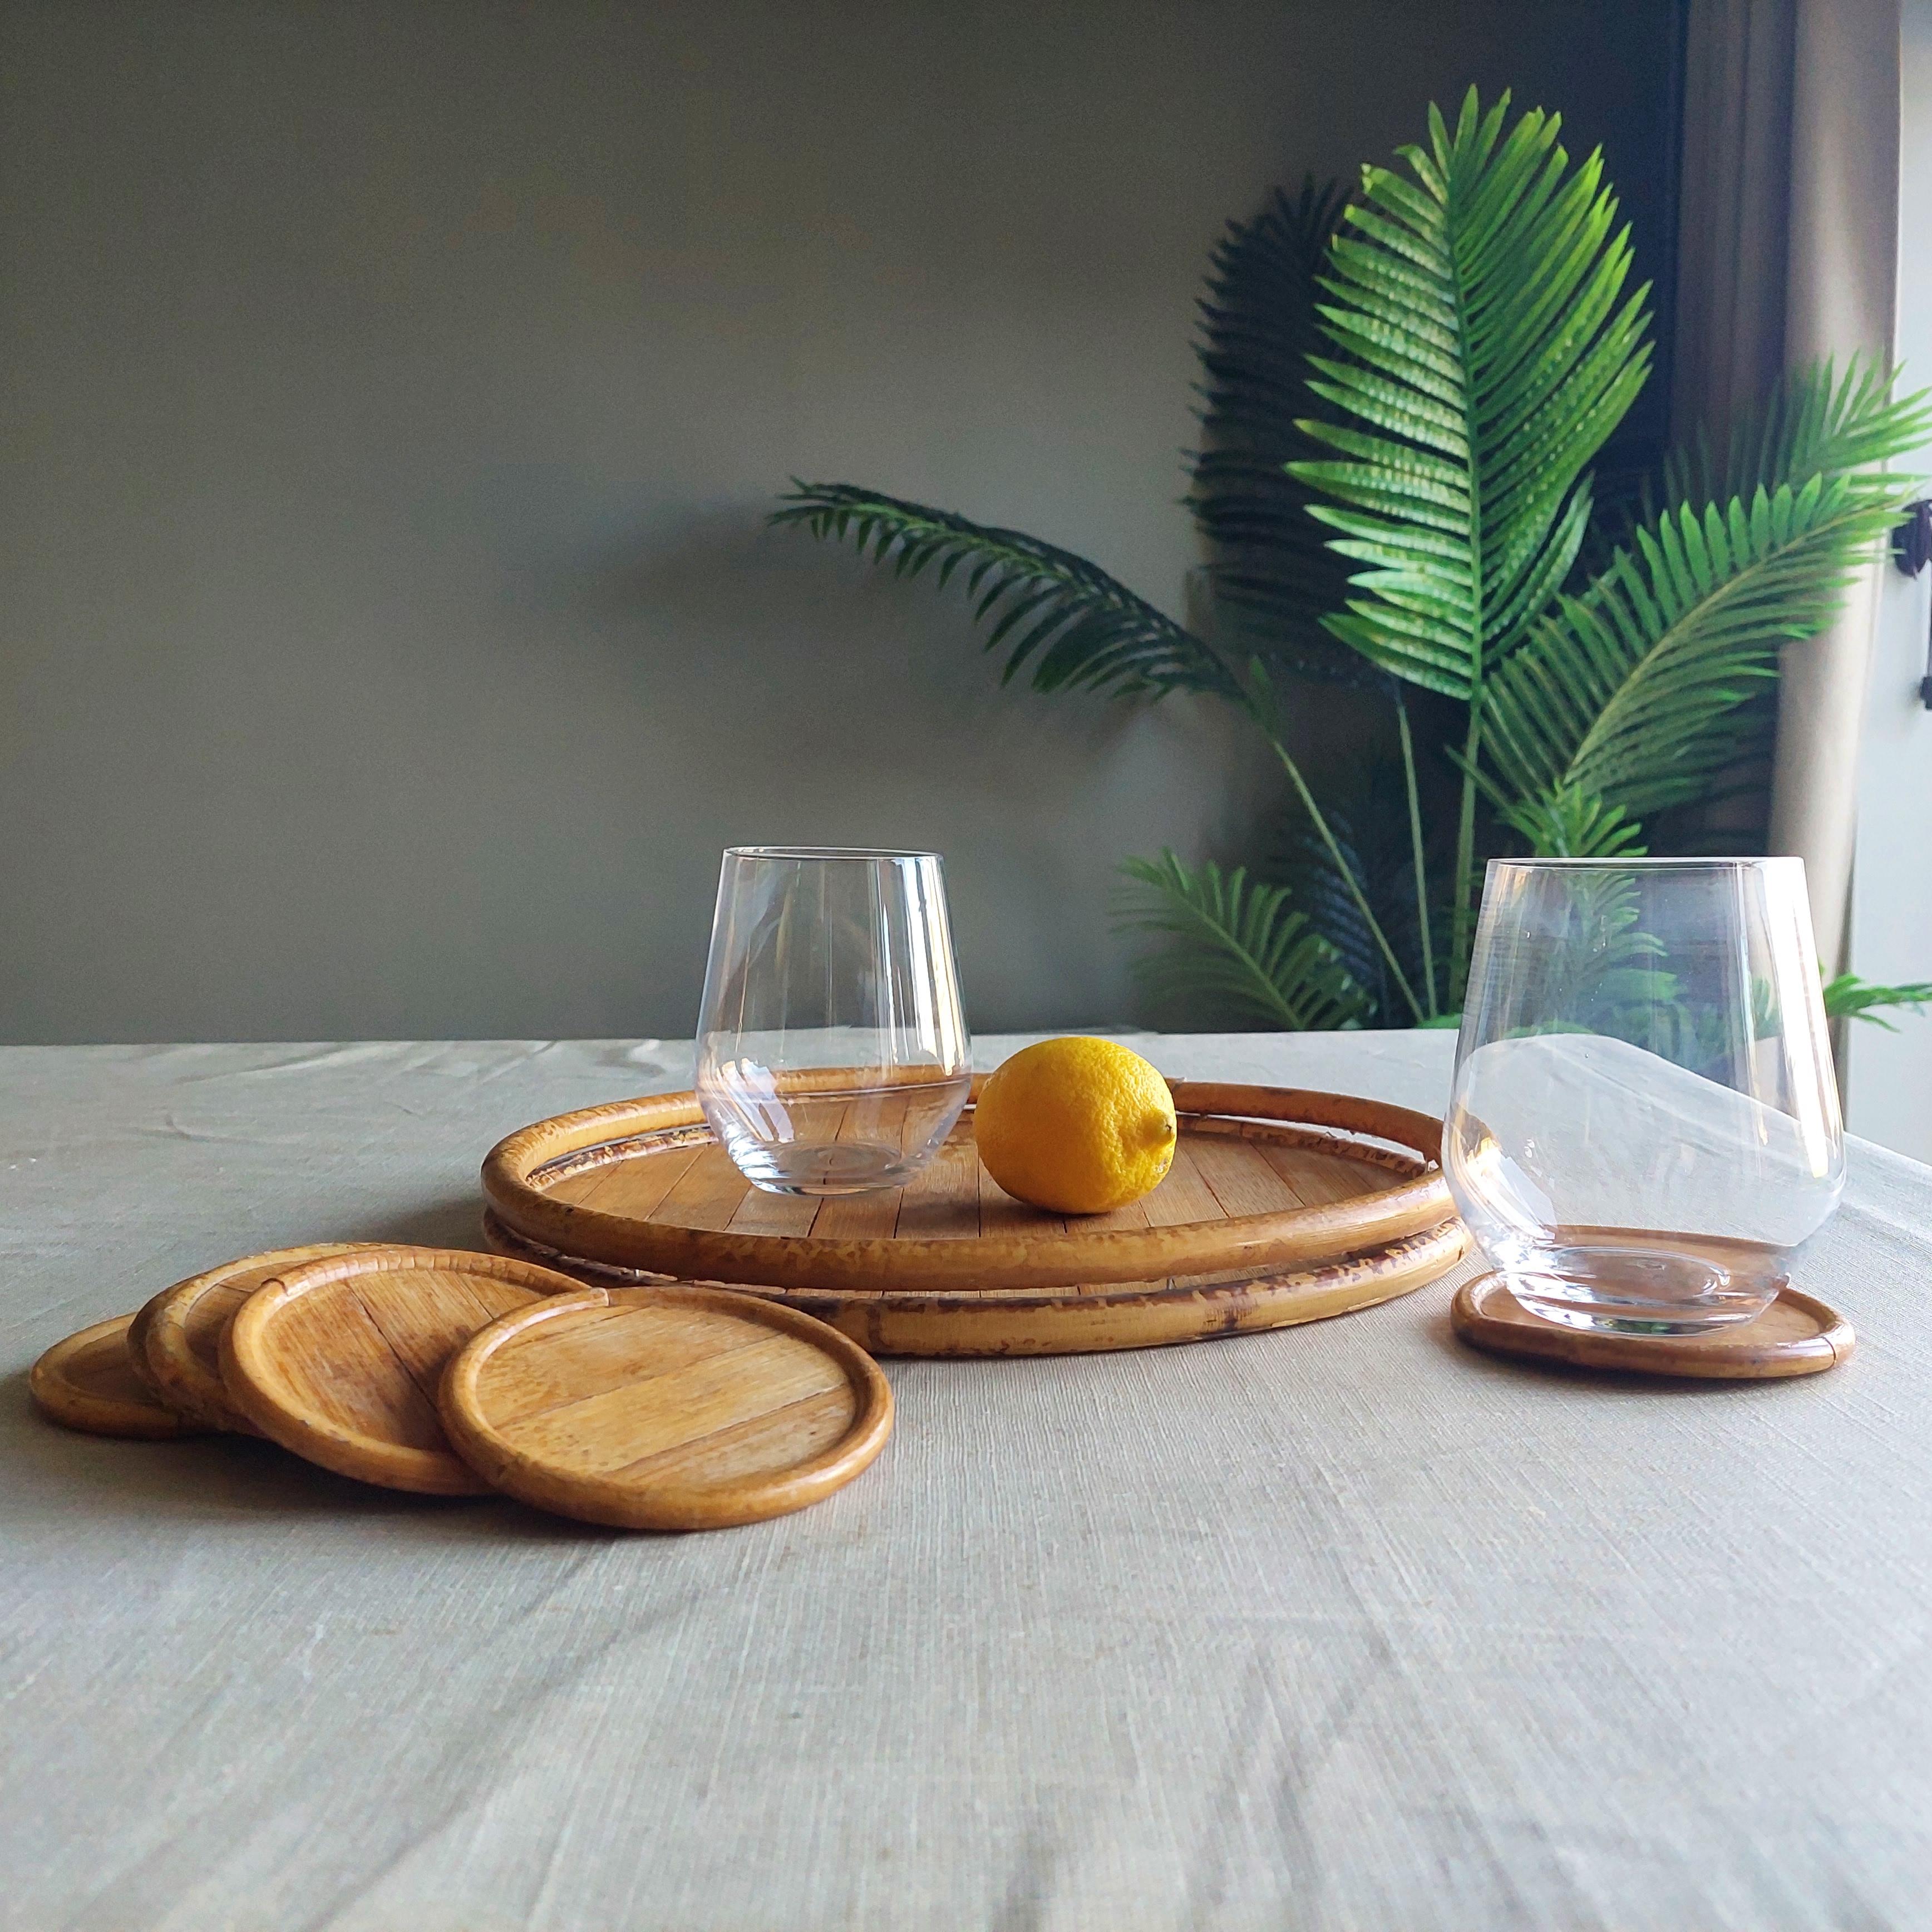 Vintage 1970's Bamboo Serving Tray with 6 coasters. 

Features:
Round shape
Light bamboo tone
Tray with low double lip and wide surface on the tray
Coasters with single low lip

Very beautiful set.
A boho vintage bamboo circular serving tray in that